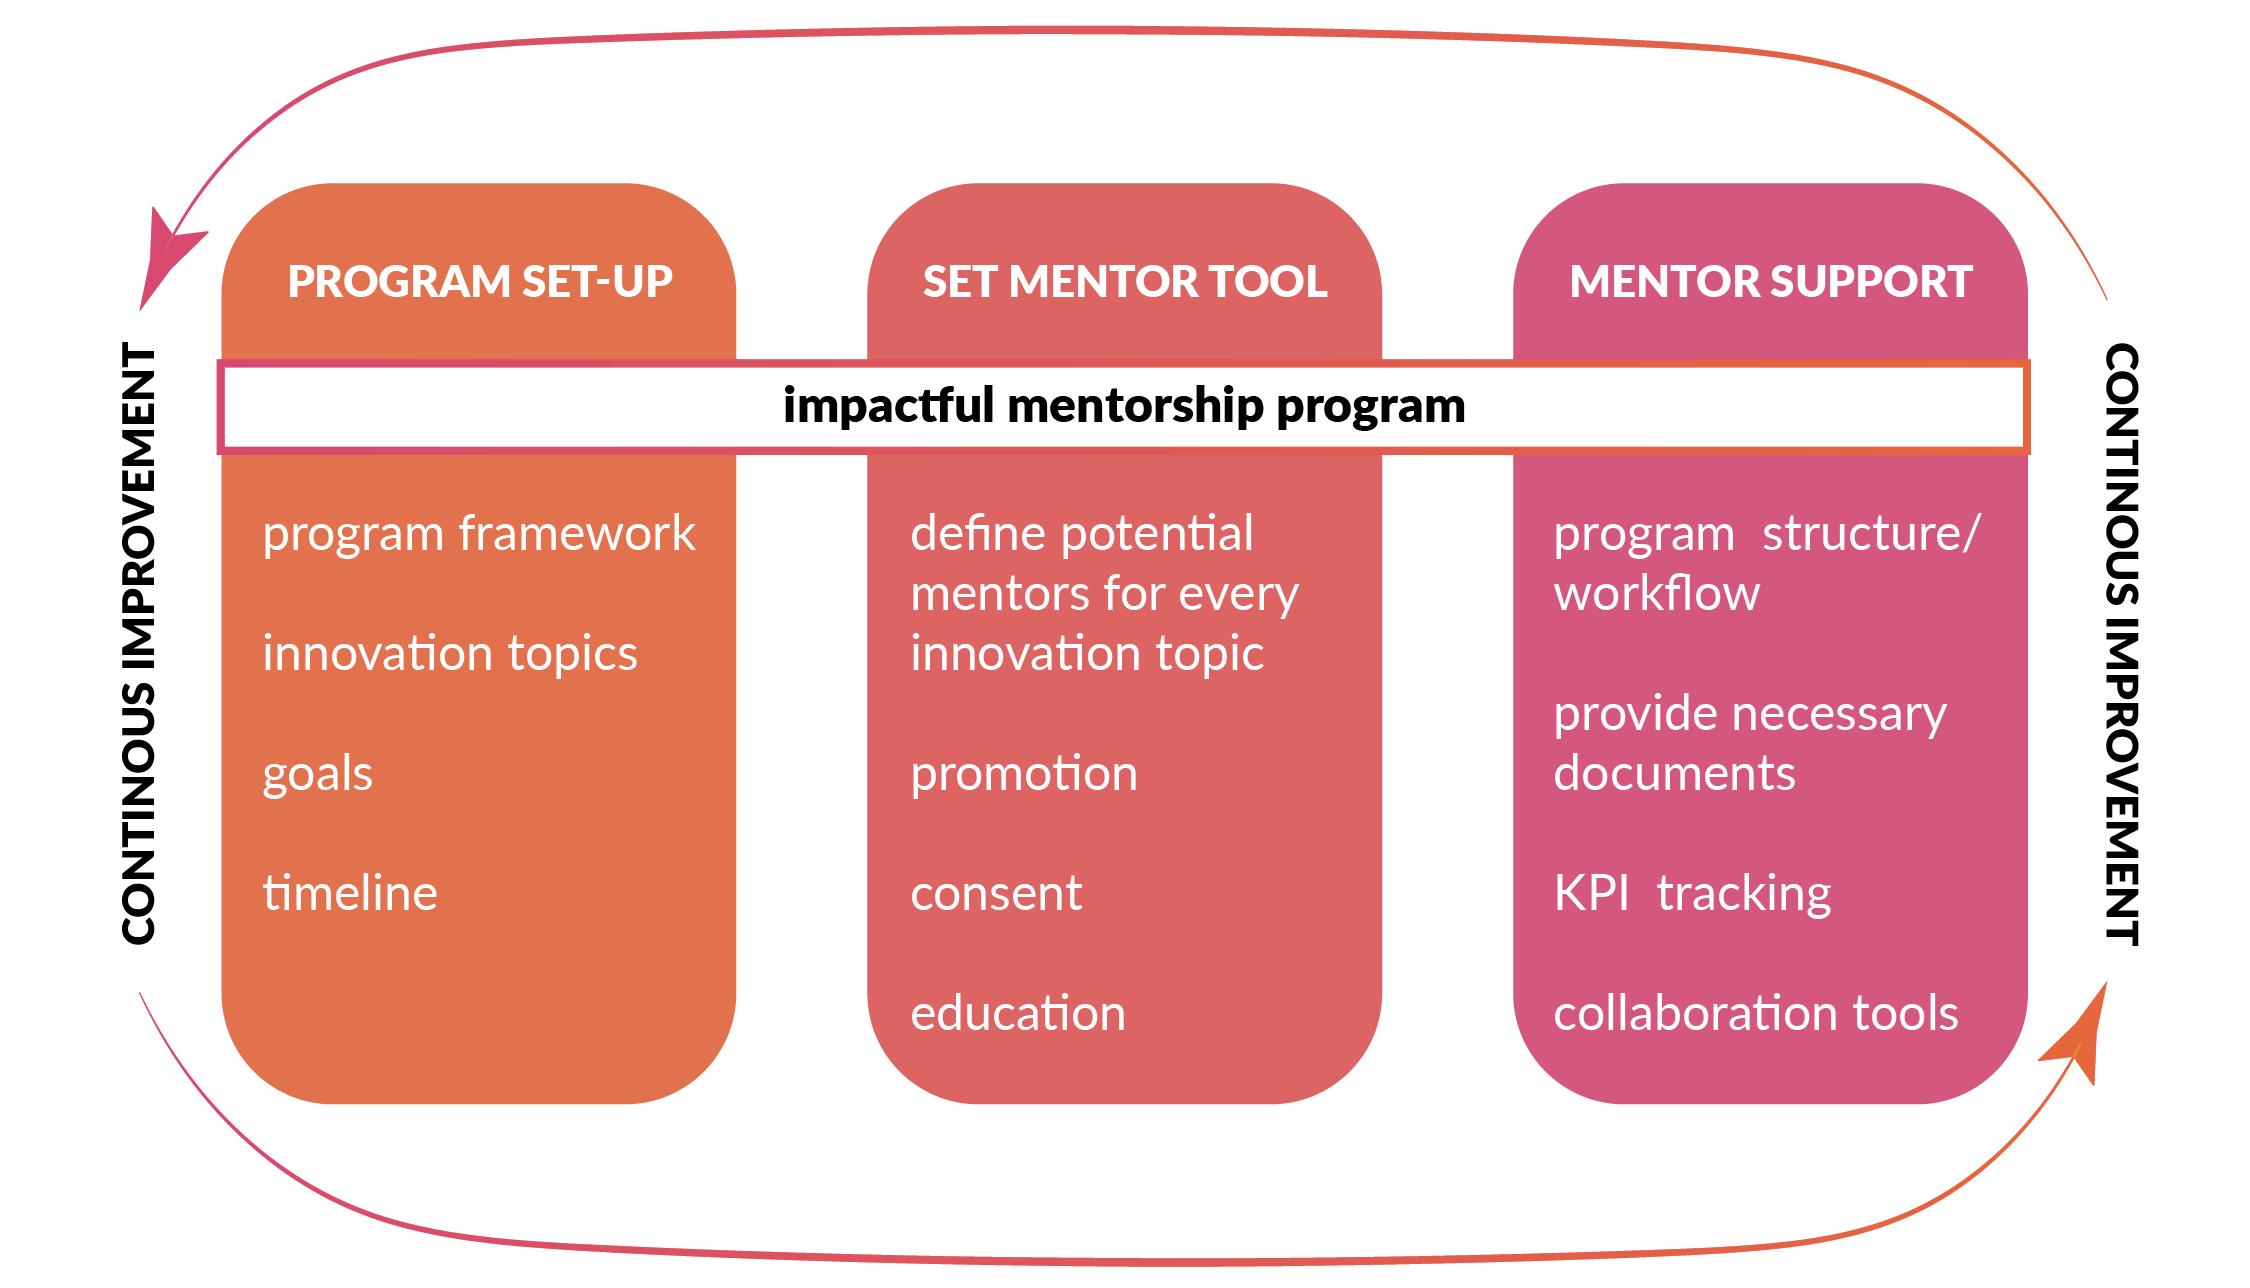 startup mentoring in corporate programs - Partners